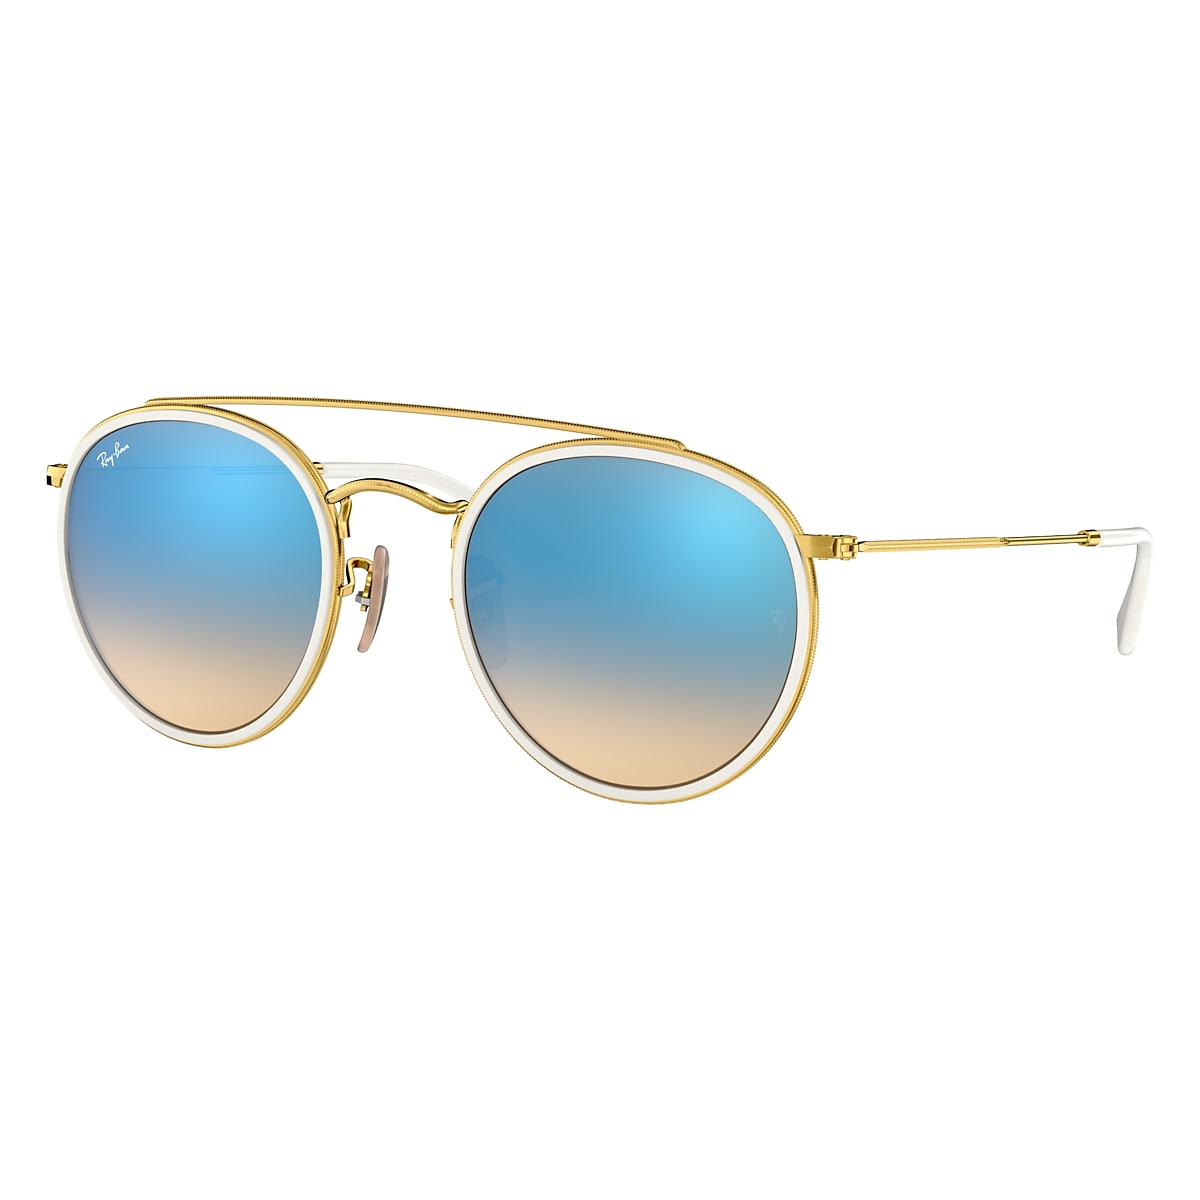 ROUND DOUBLE BRIDGE Sunglasses in Gold and Blue - RB3647N